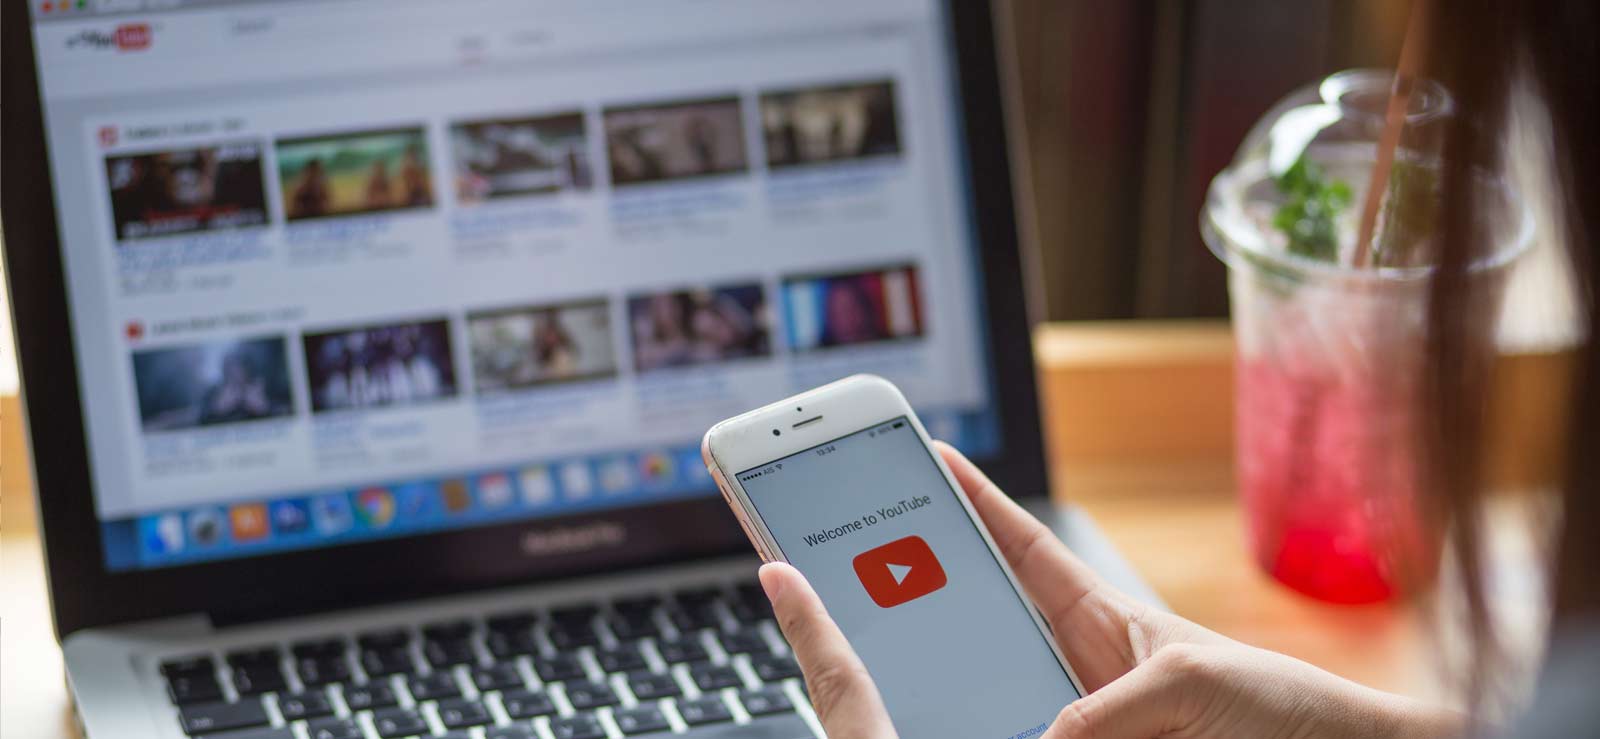 3 Simple Ways To Recover Deleted YouTube Videos